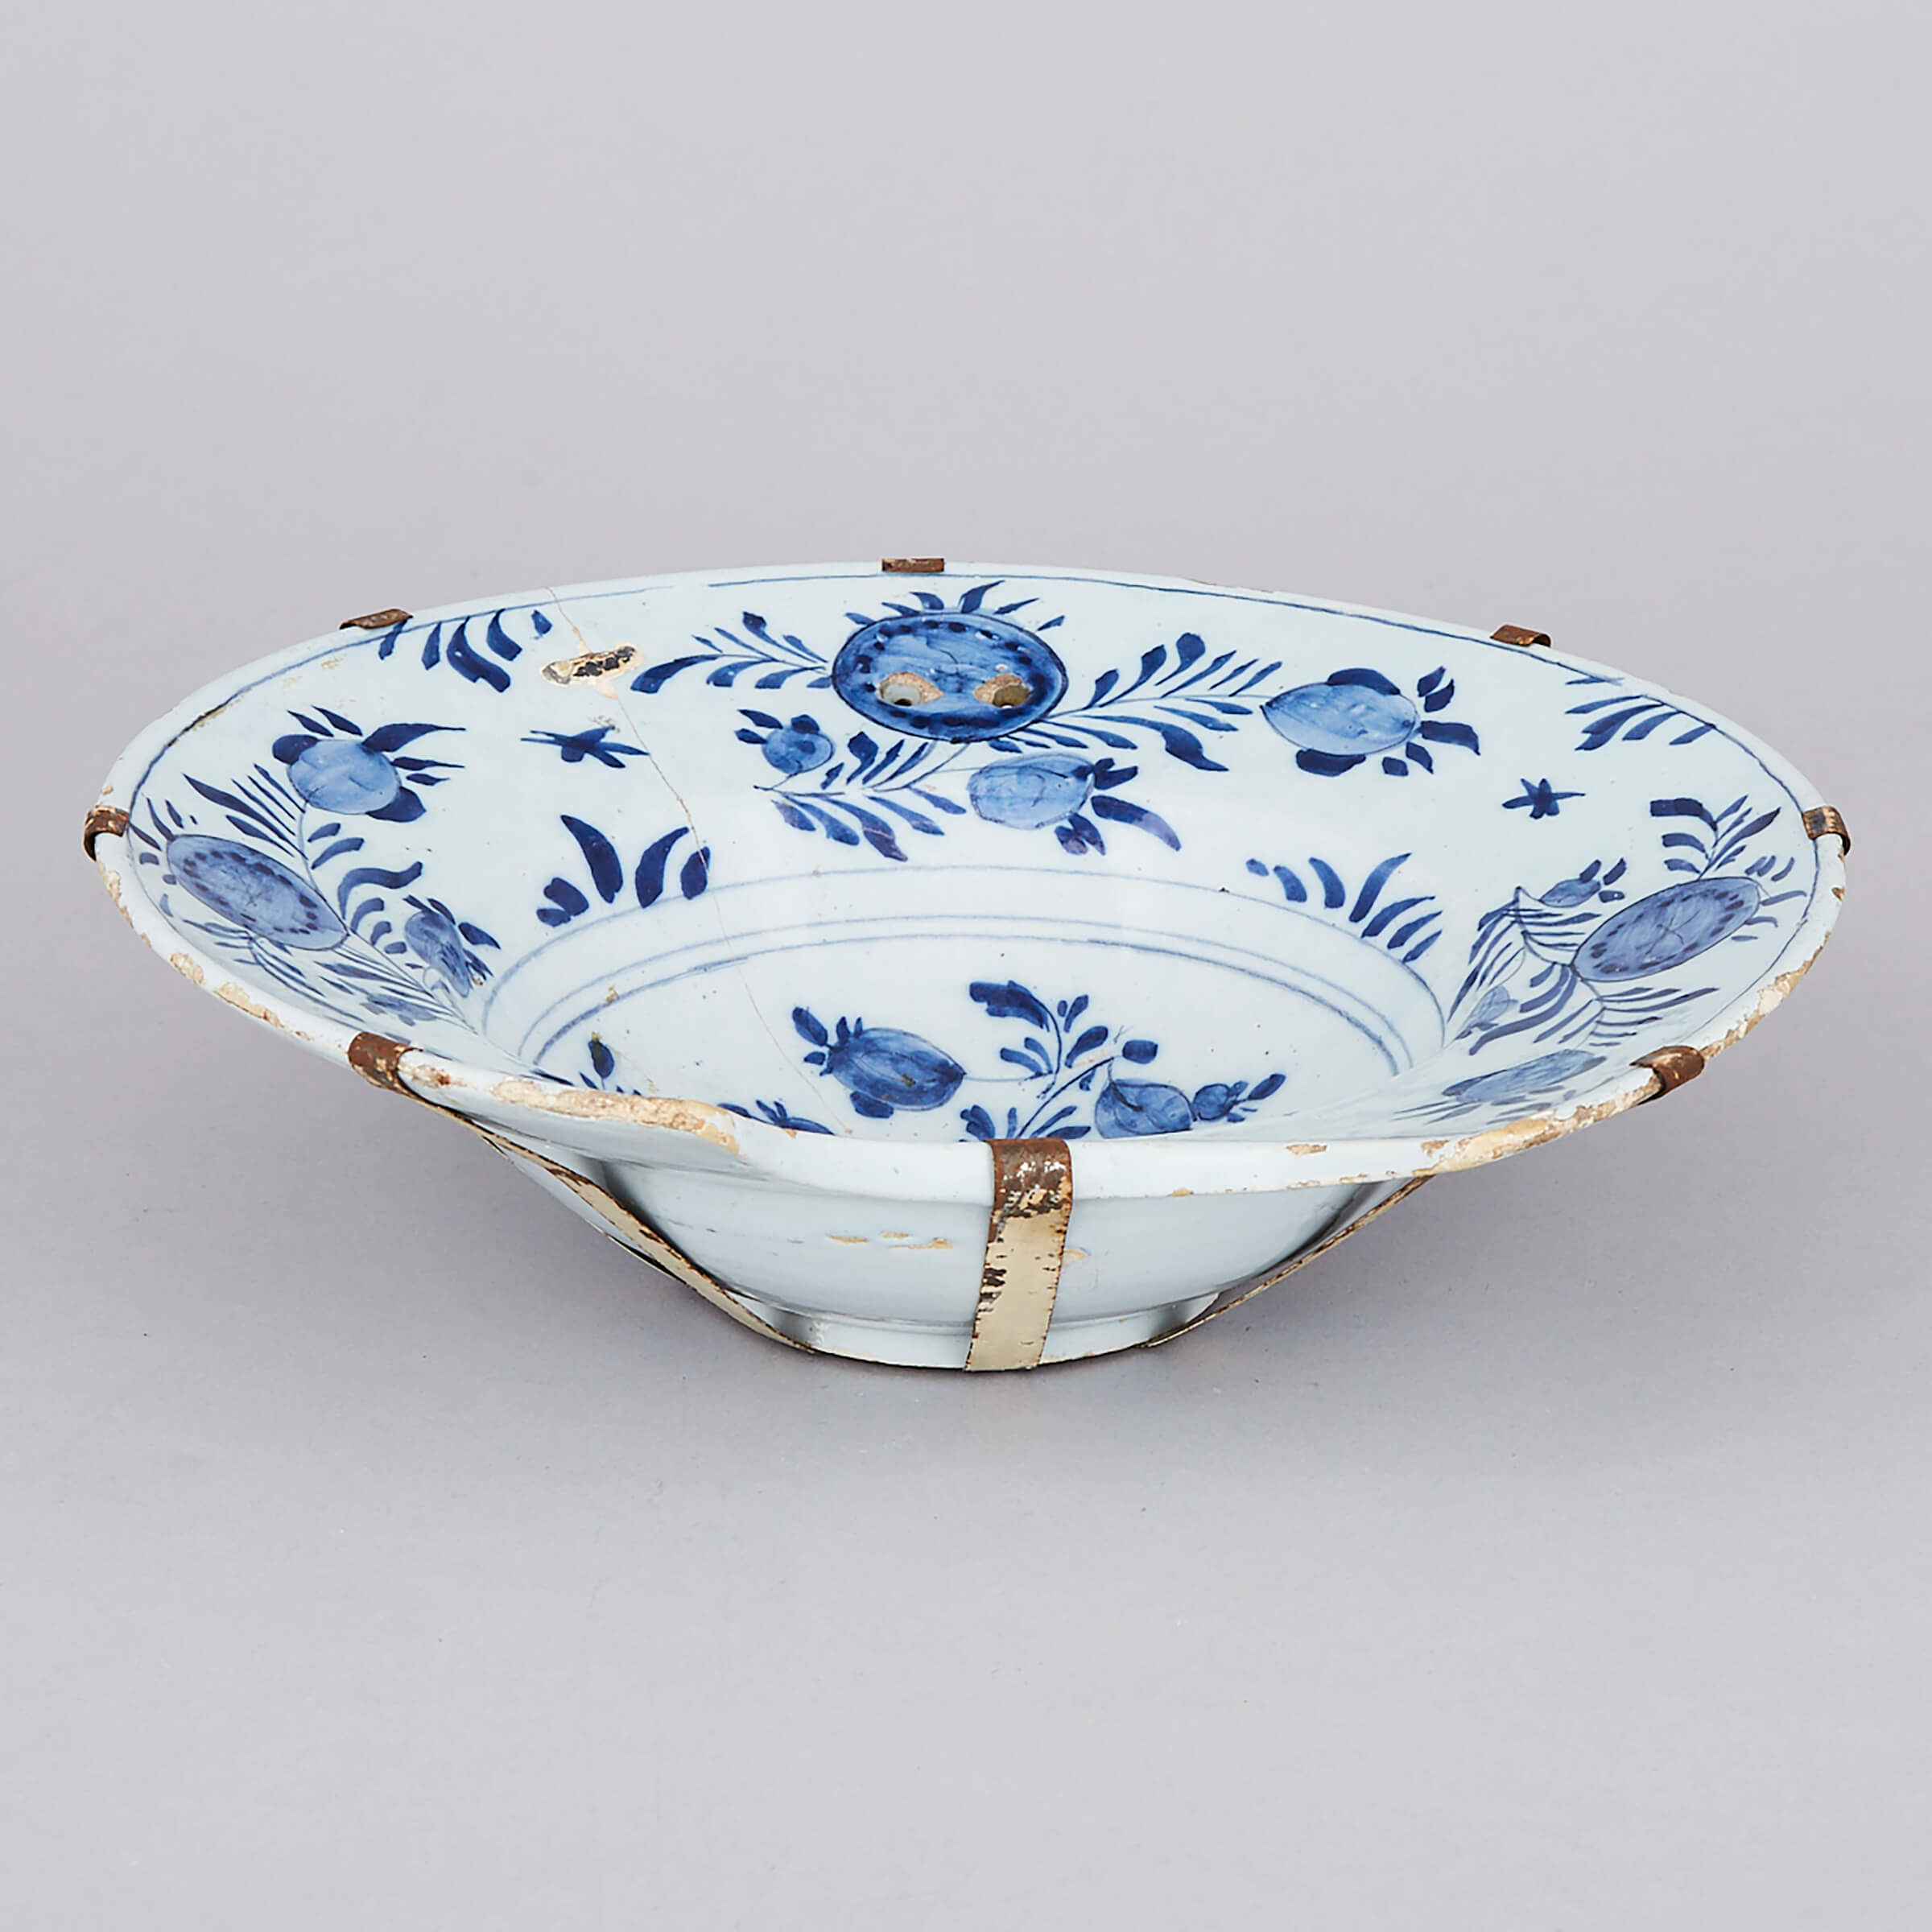 Delft Blue and White Barber’s Bowl, 18th century